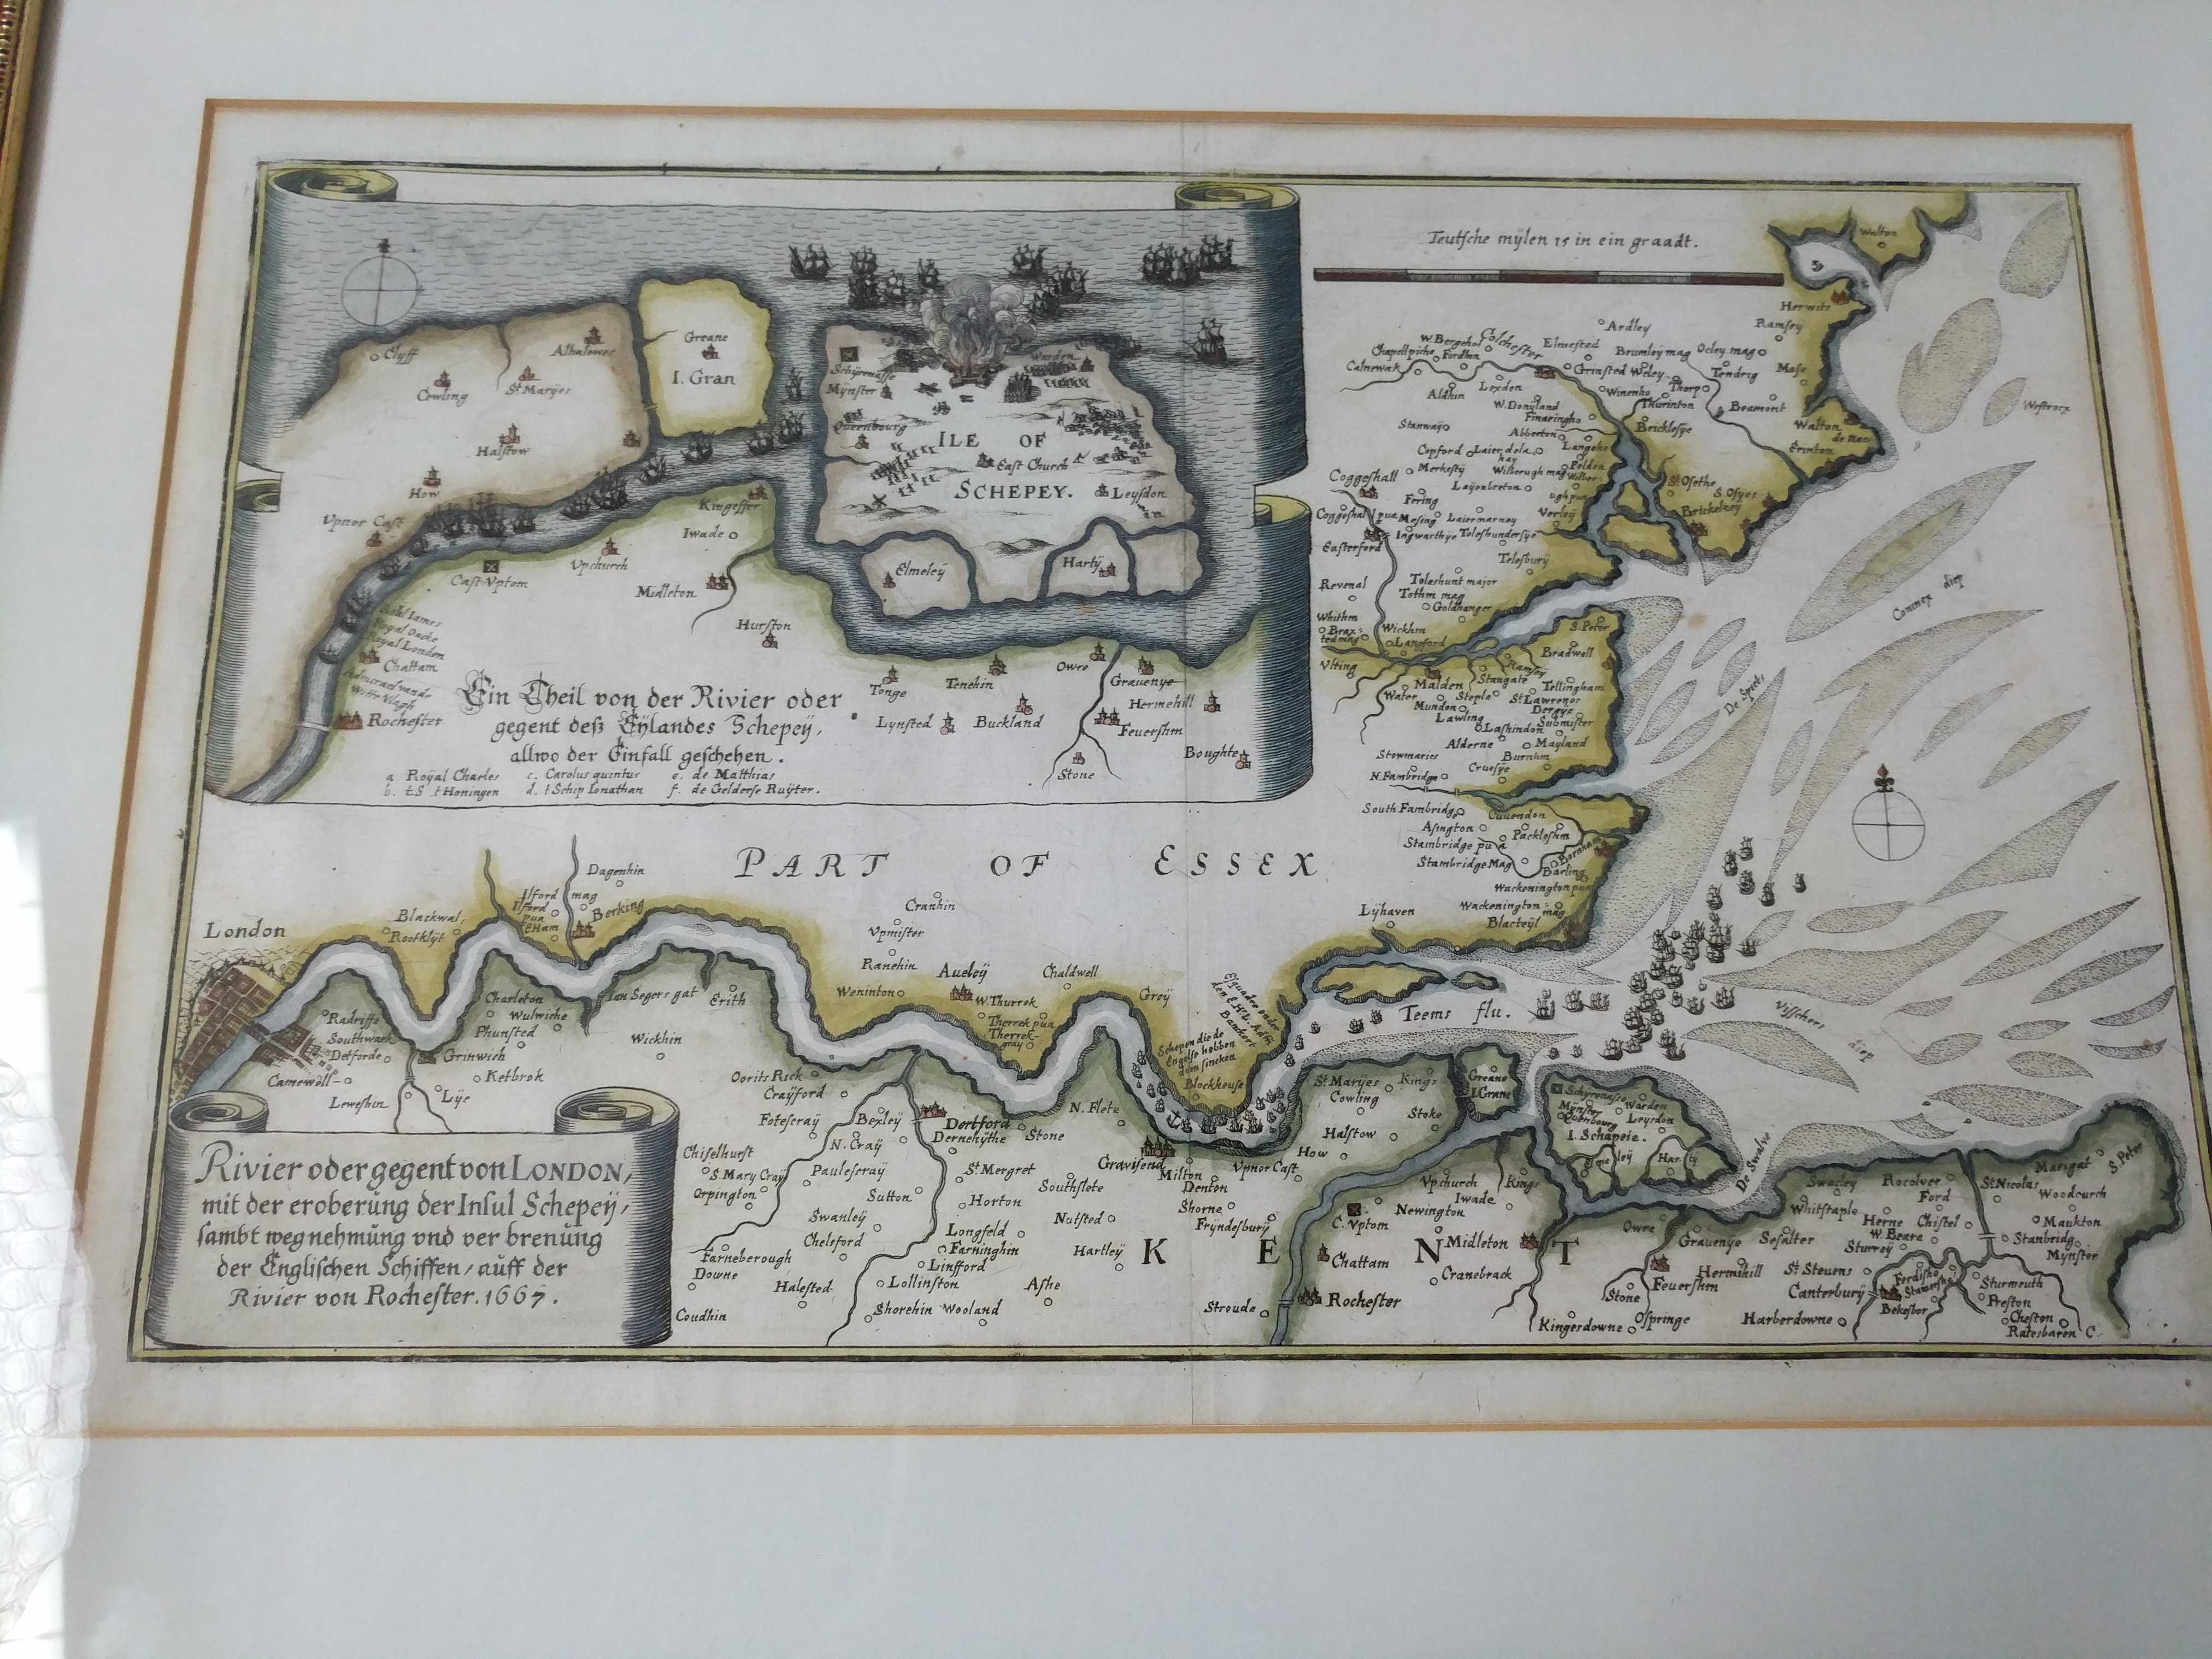 A framed map of the "River Von Rochester" dated 1667 and one other map of Essex that is undated.